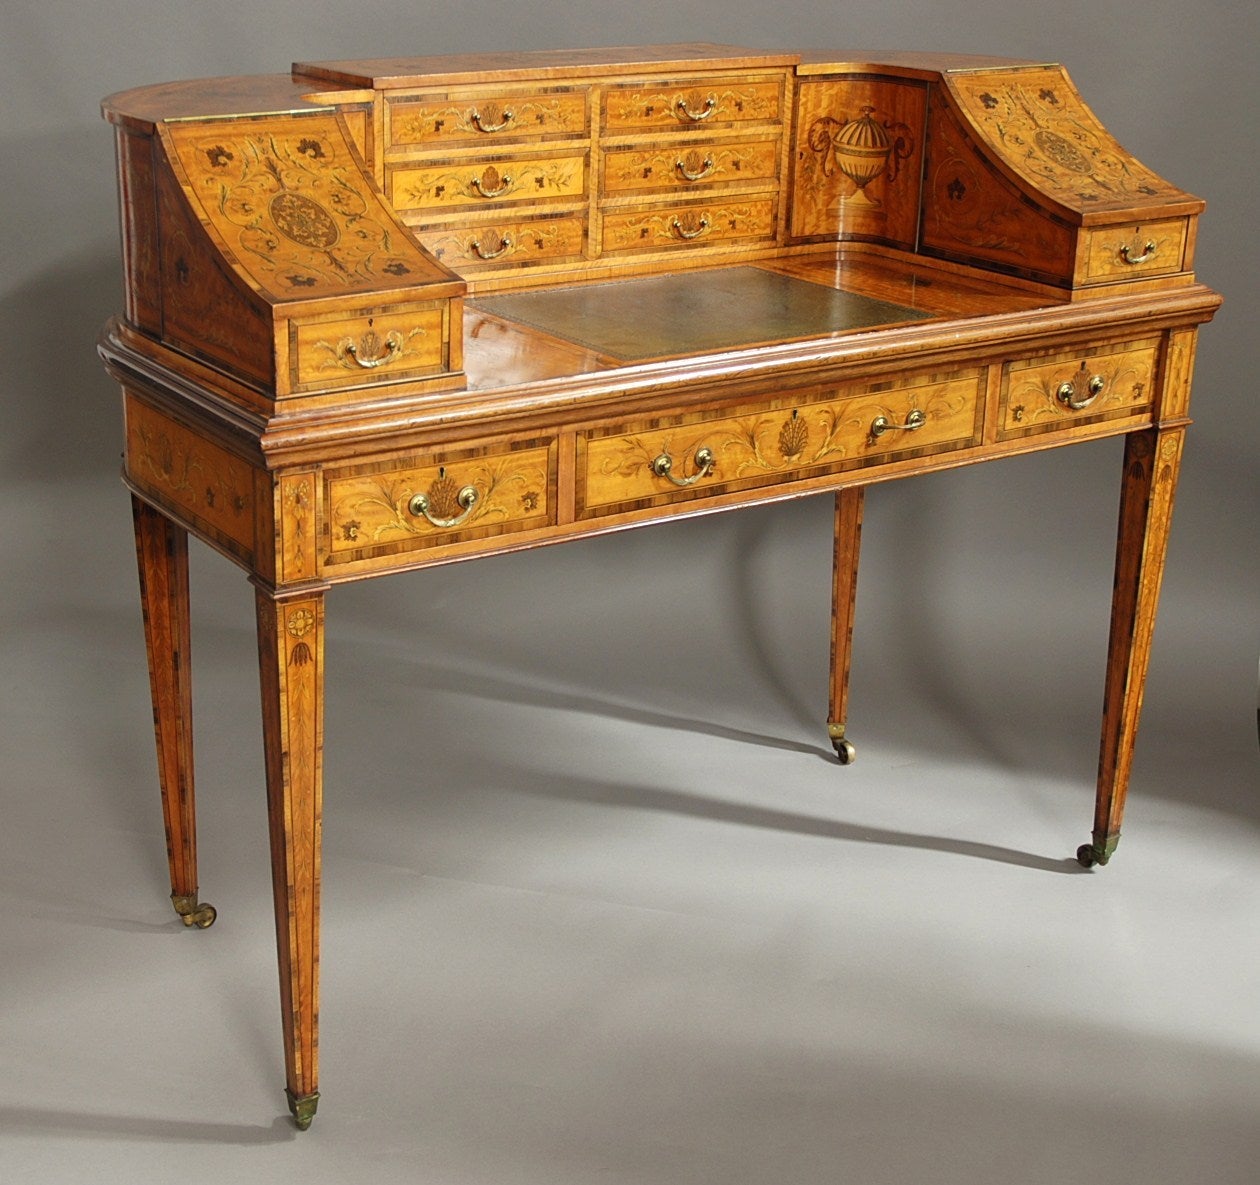 An early 20th century exhibition quality satinwood inlaid Carlton House desk in the Classical form of superb patina, attributed to Edwards & Roberts - ADDITIONAL IMAGES CAN BE VIEWED BELOW:

The desk is completely veneered with finely figured